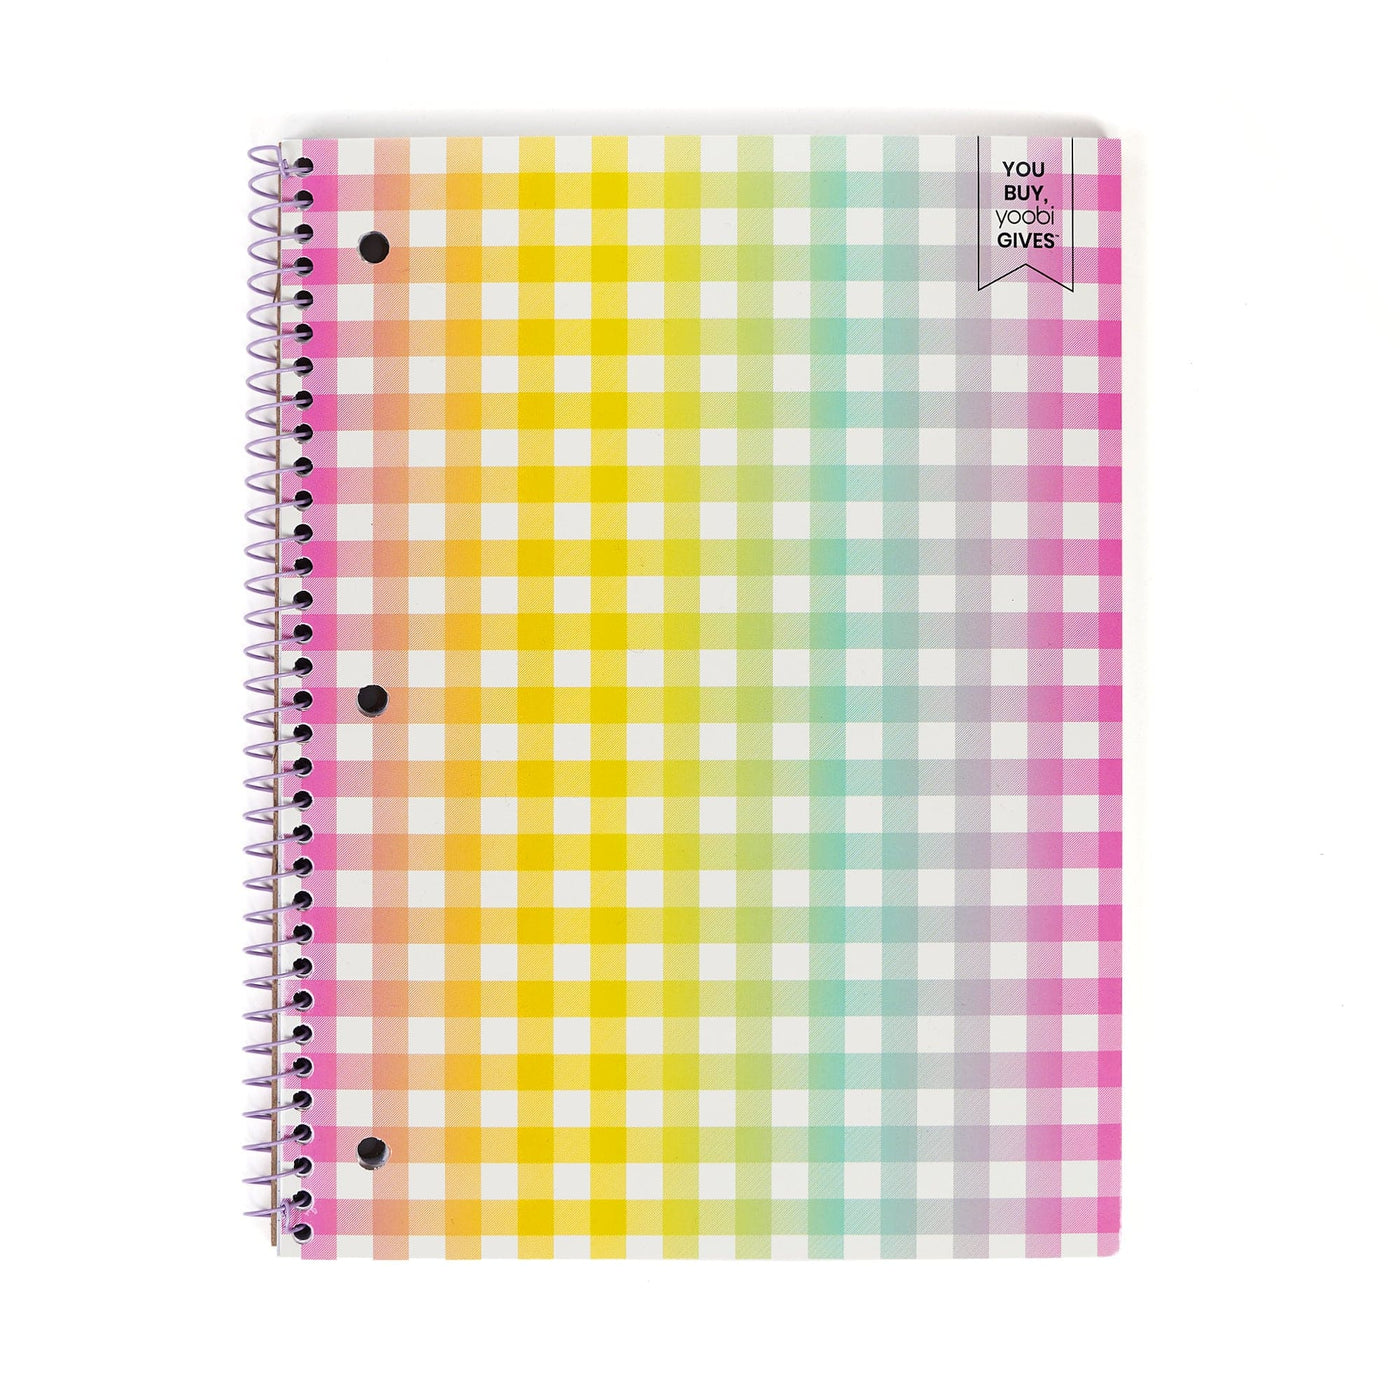 Gingham printed one subject spiral notebook with pink, orange, yellow, mint and lavender ombre colors